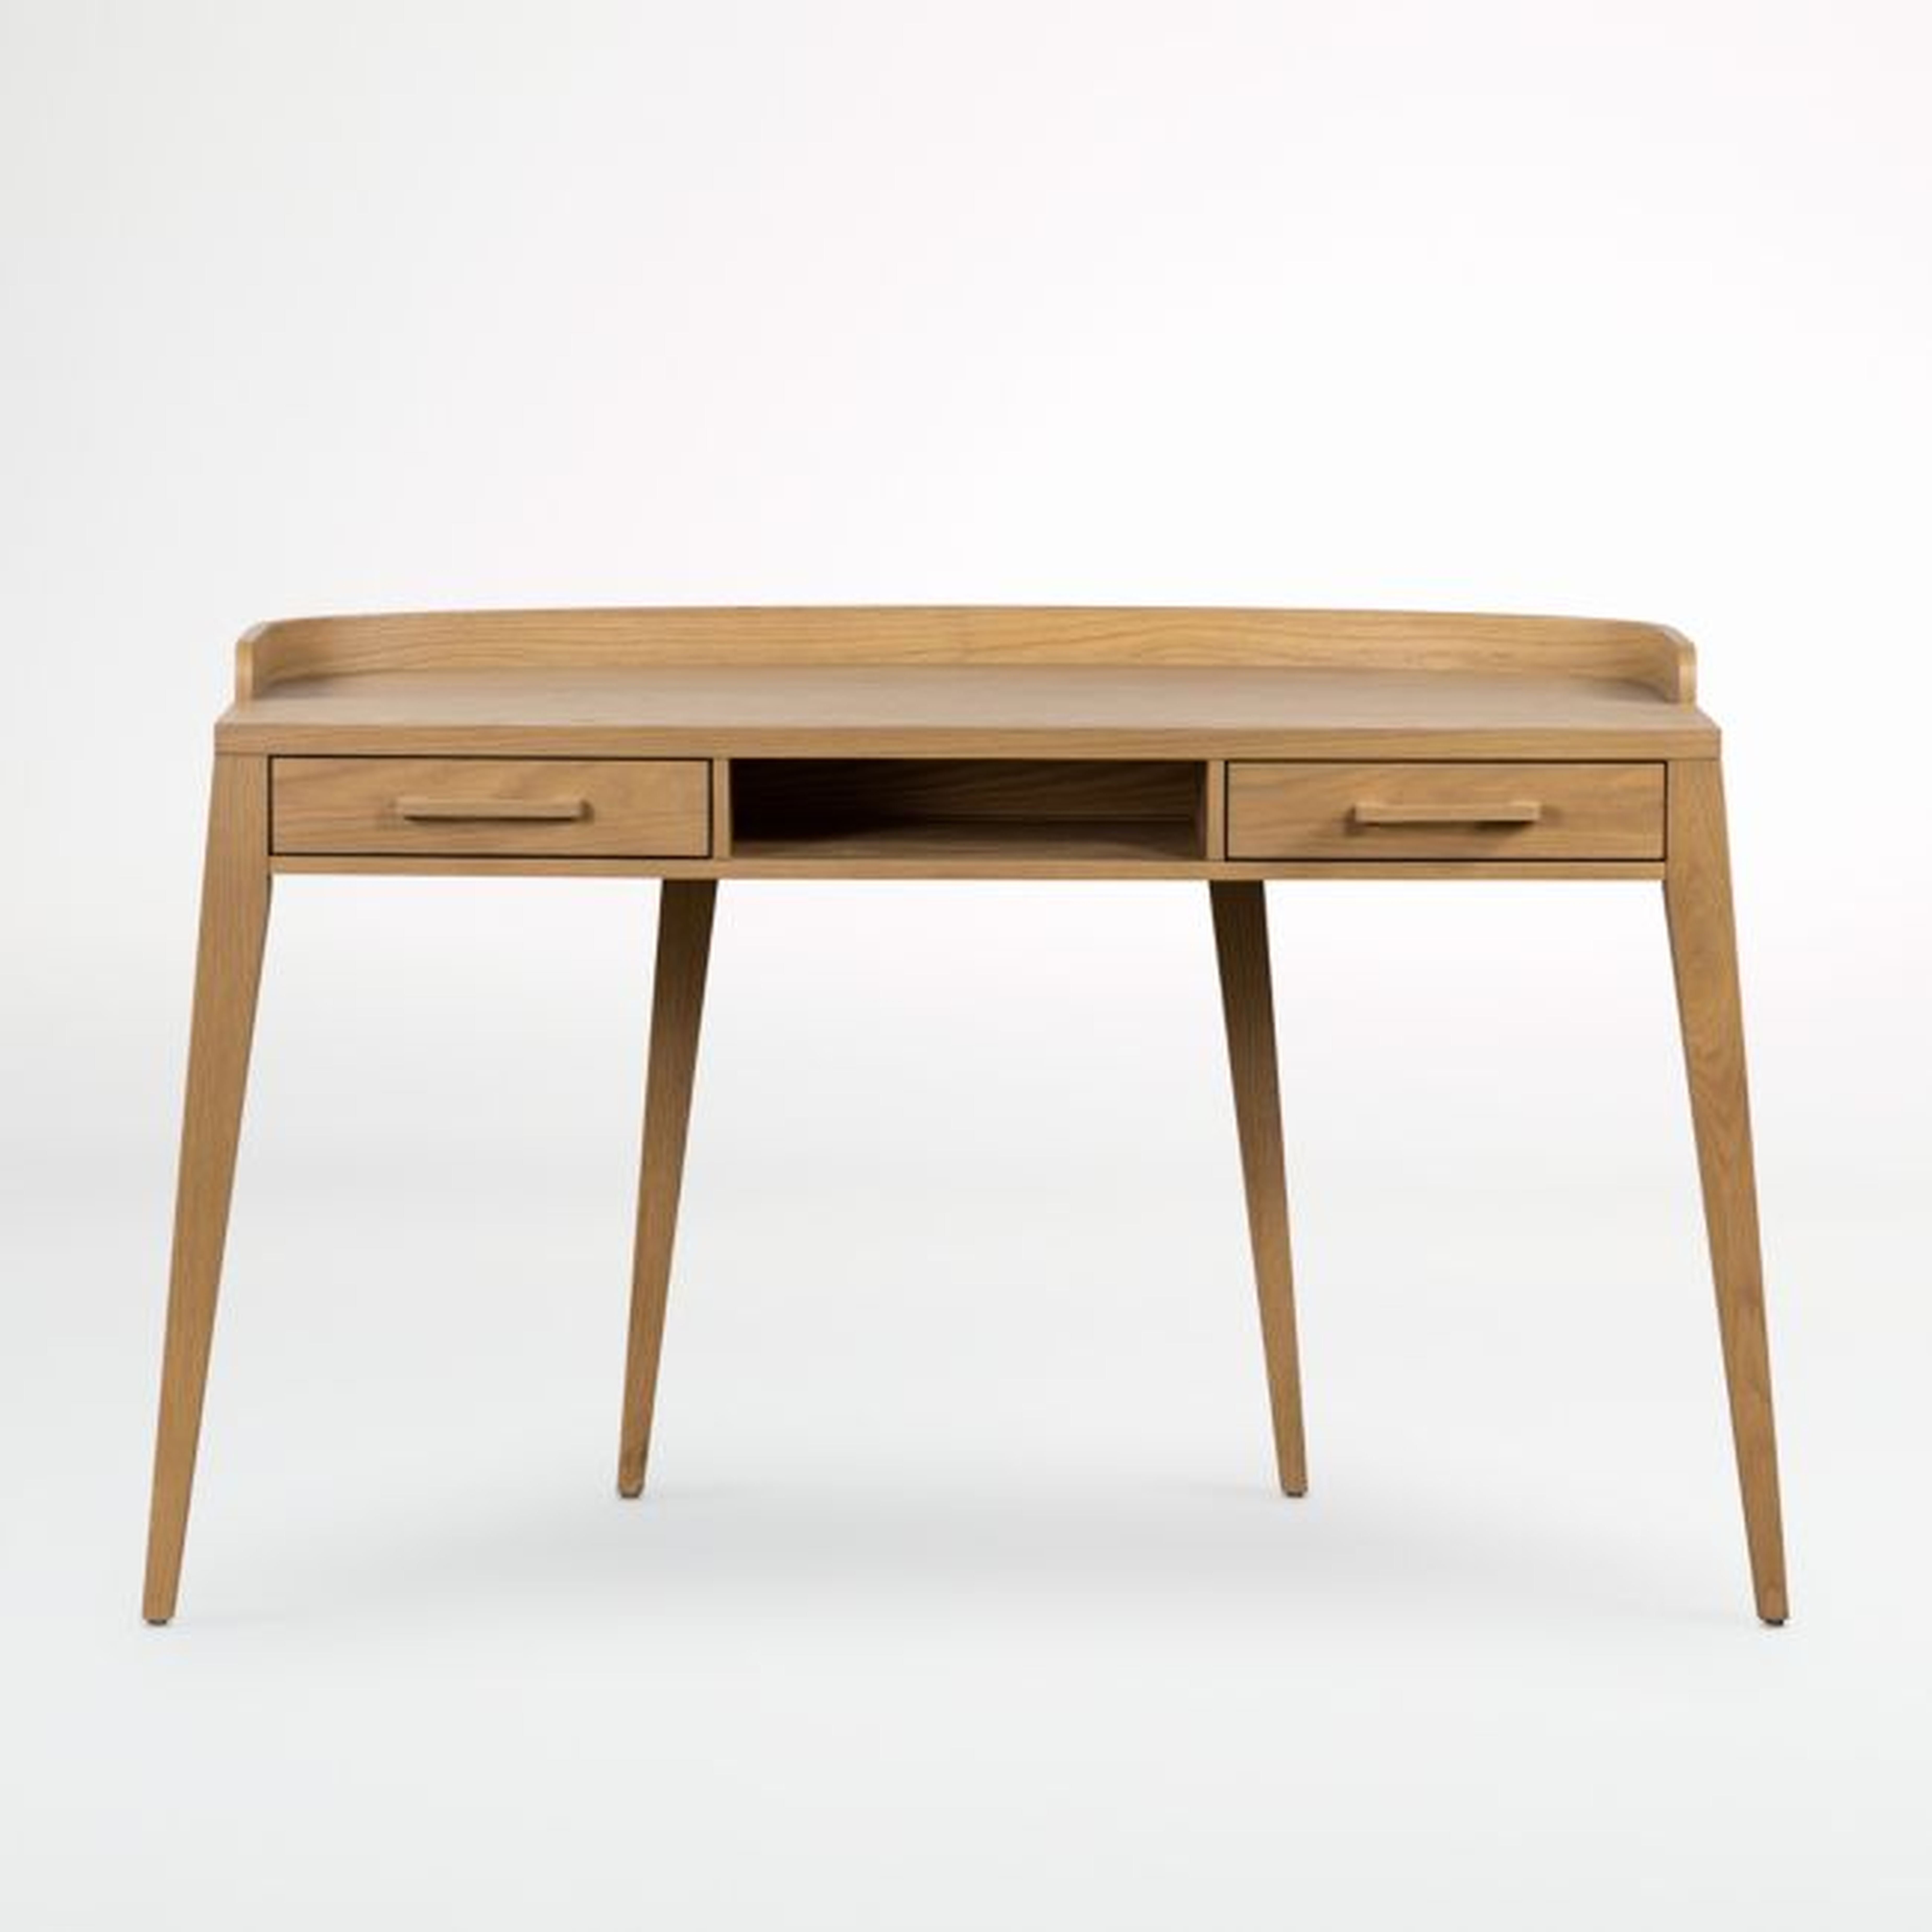 Manchester Desk - Crate and Barrel